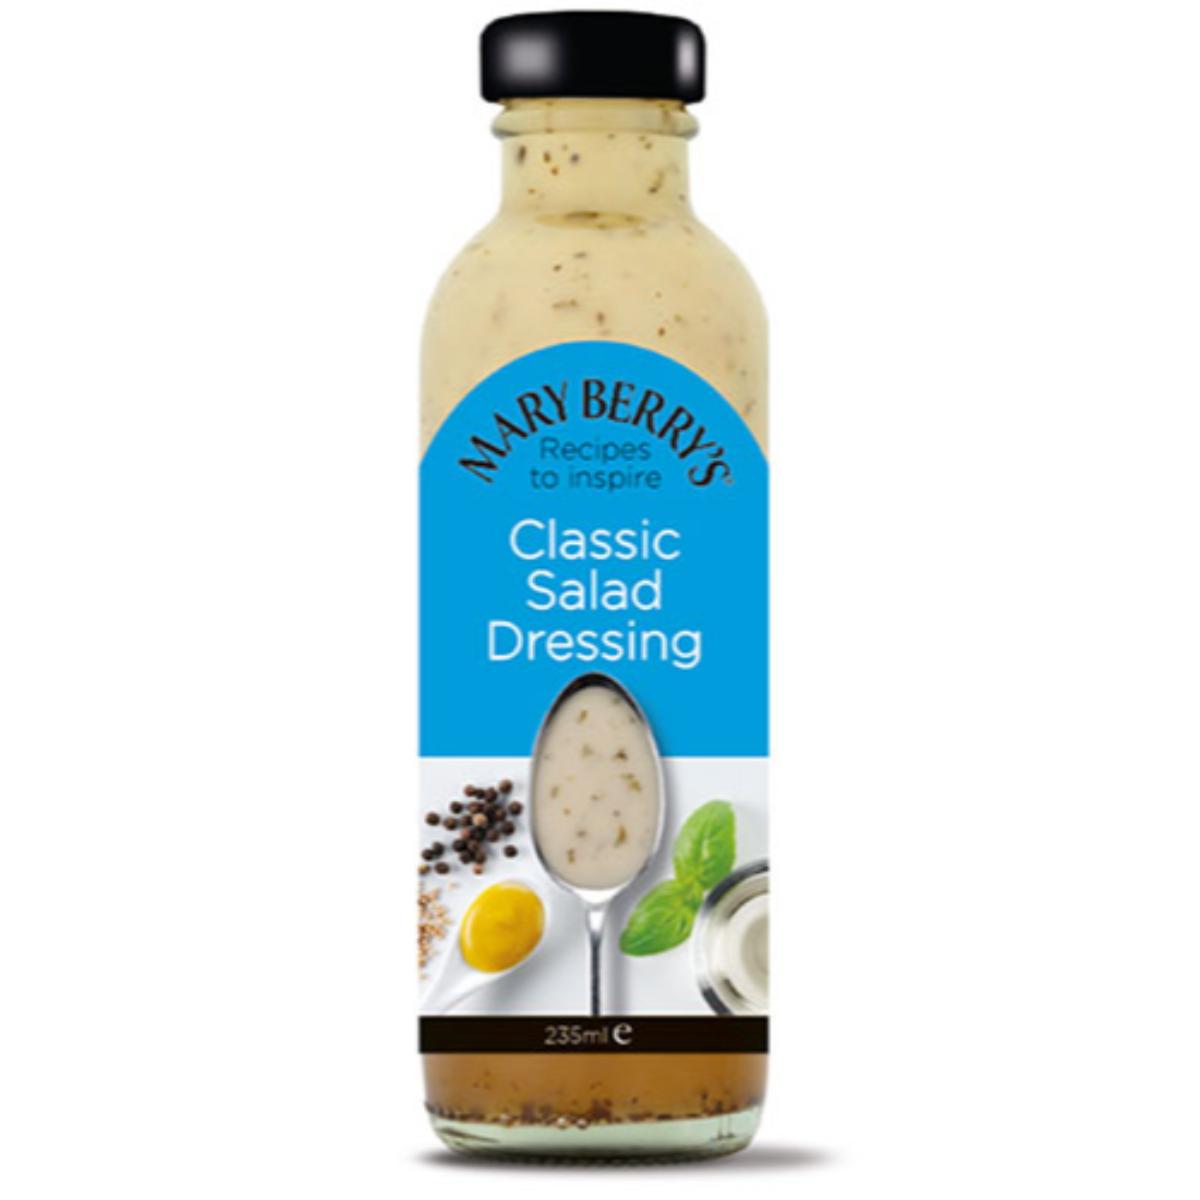 Mary Berry Salad Dressing - Kate's Kitchen